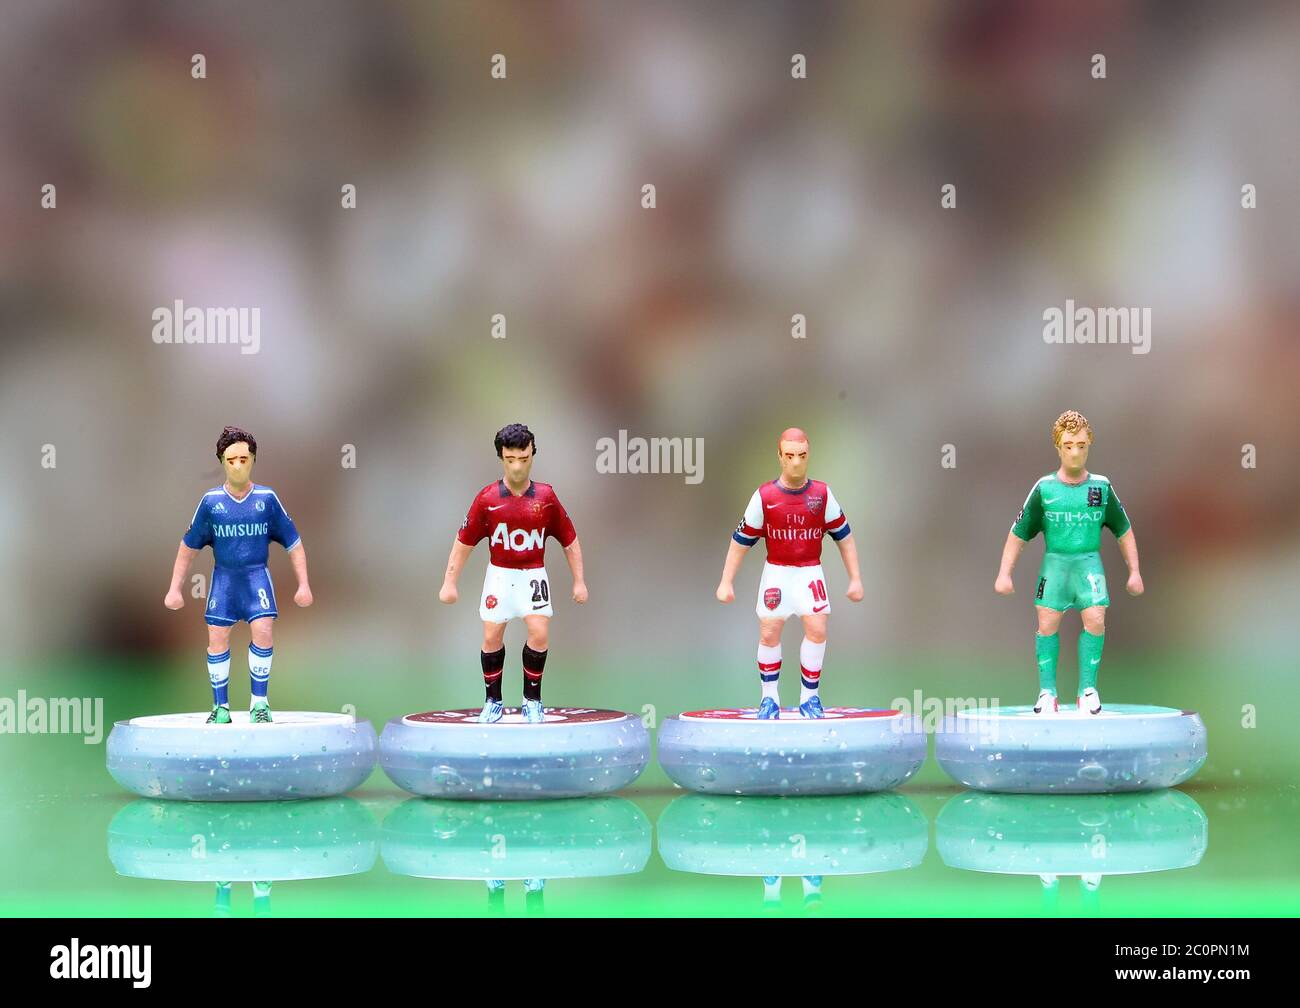 Stathis Tsolis, 33 from York has produced a superb hand painted subbuteo  figures for the start of the 2013/14 Champions League including £85 million  Gareth Bale. The figure shows great detail including